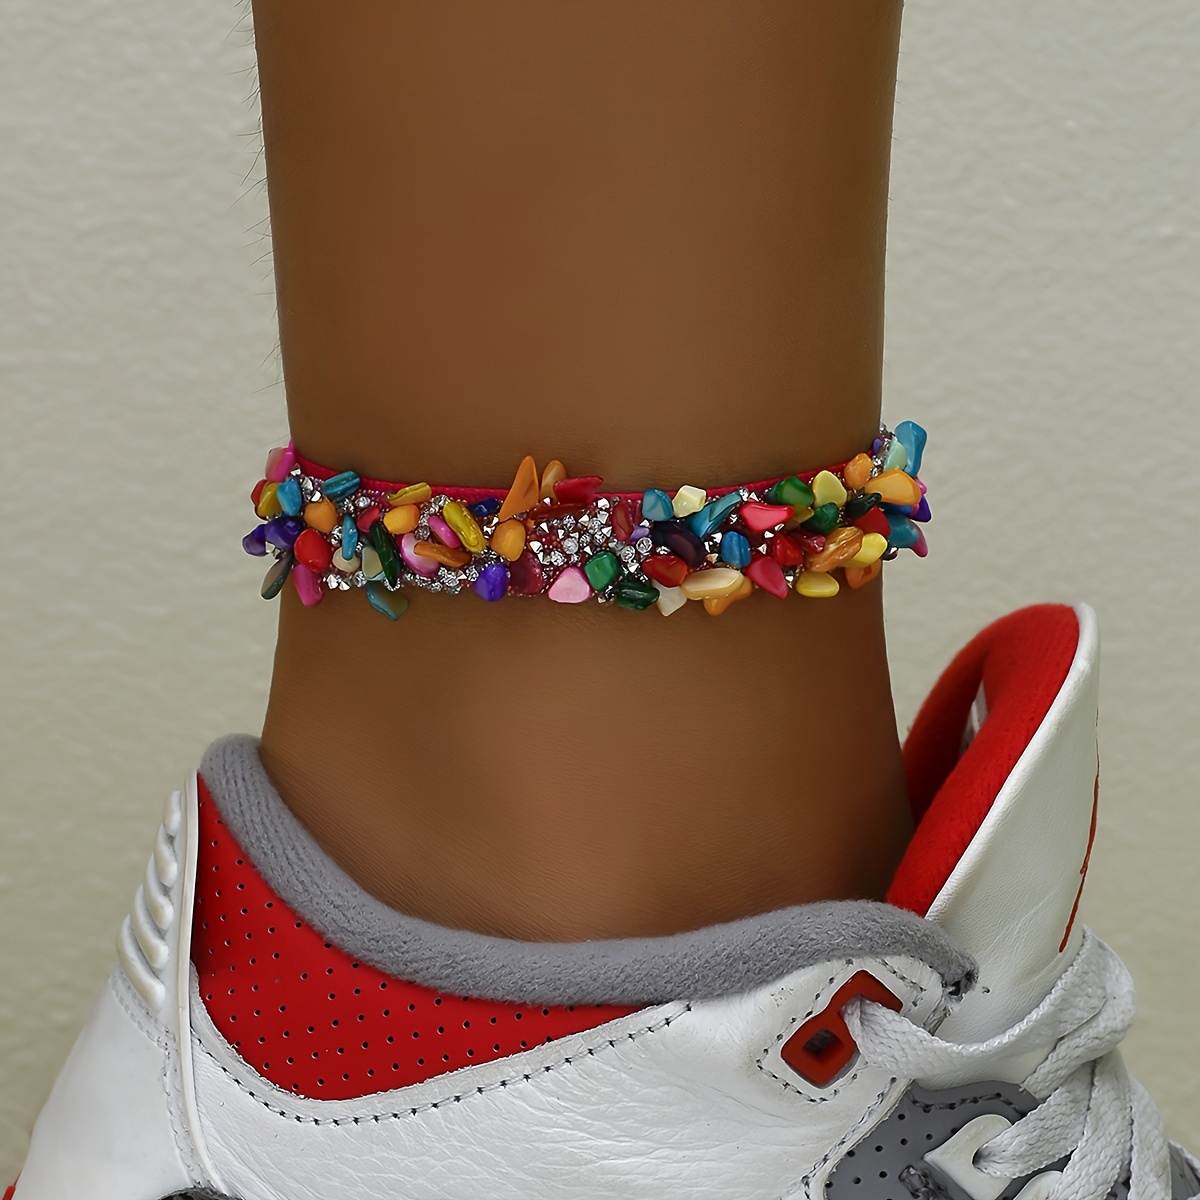 

Colorful Natural Stone & Shell With Rhinestones, Bohemian Style Women's Ankle Bracelet For Summer Vacation & Holiday Parties